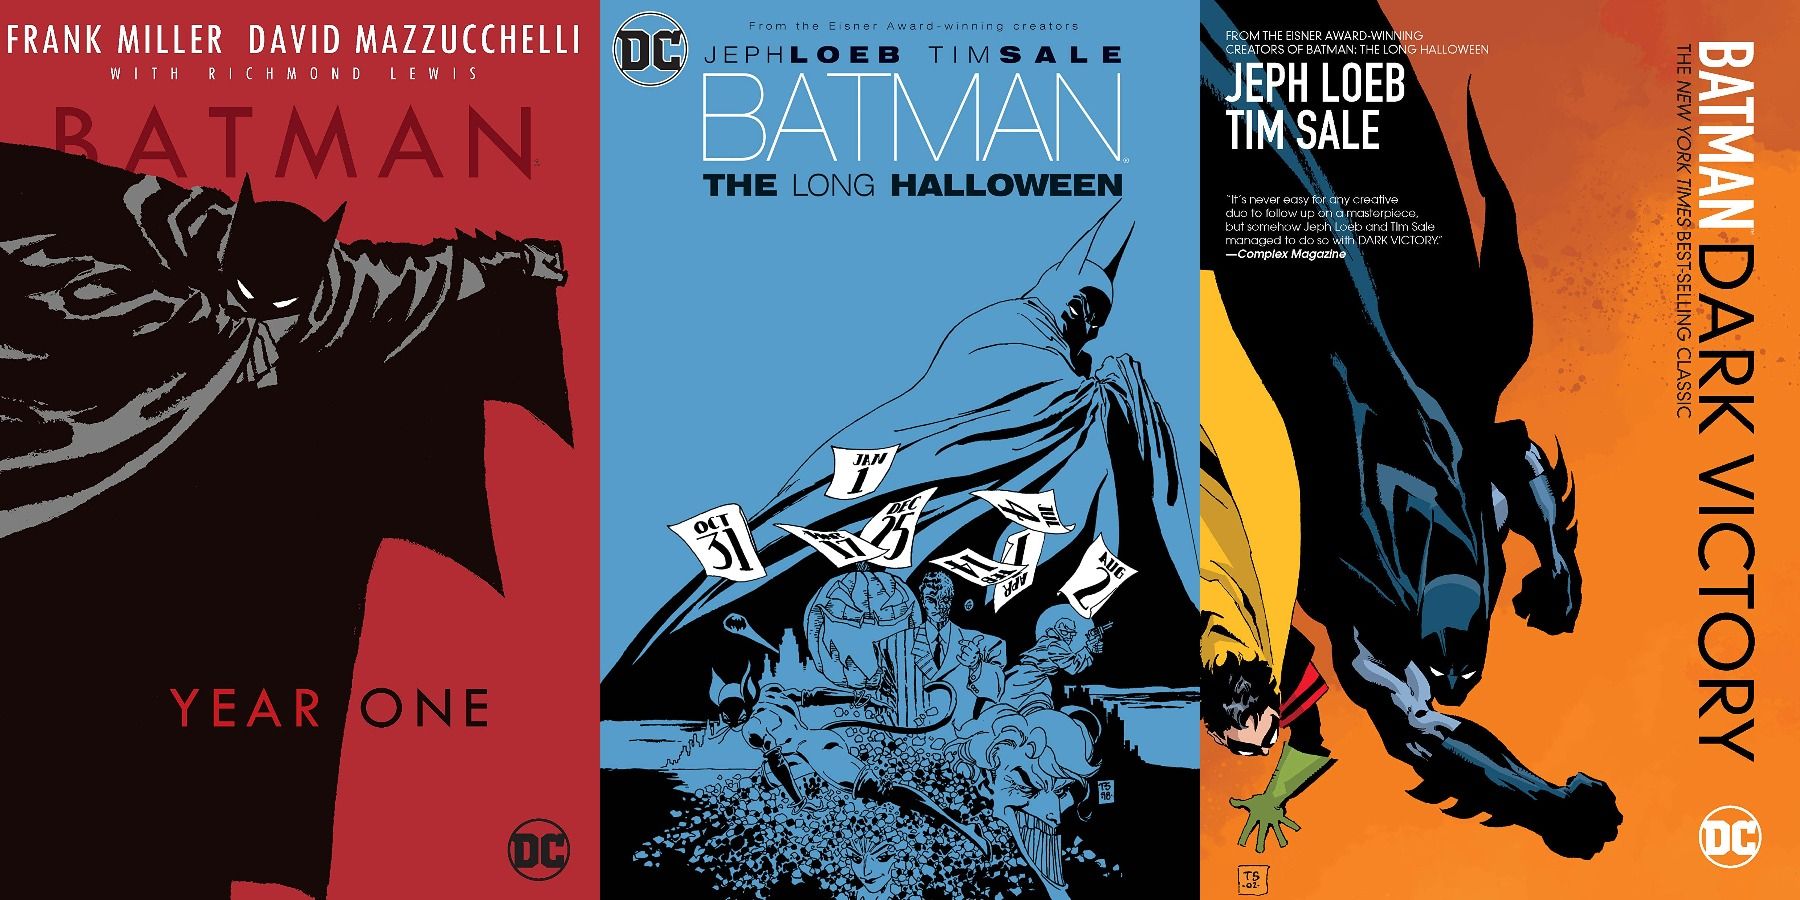 Covers for Year One, The Long Halloween, and Dark Victory